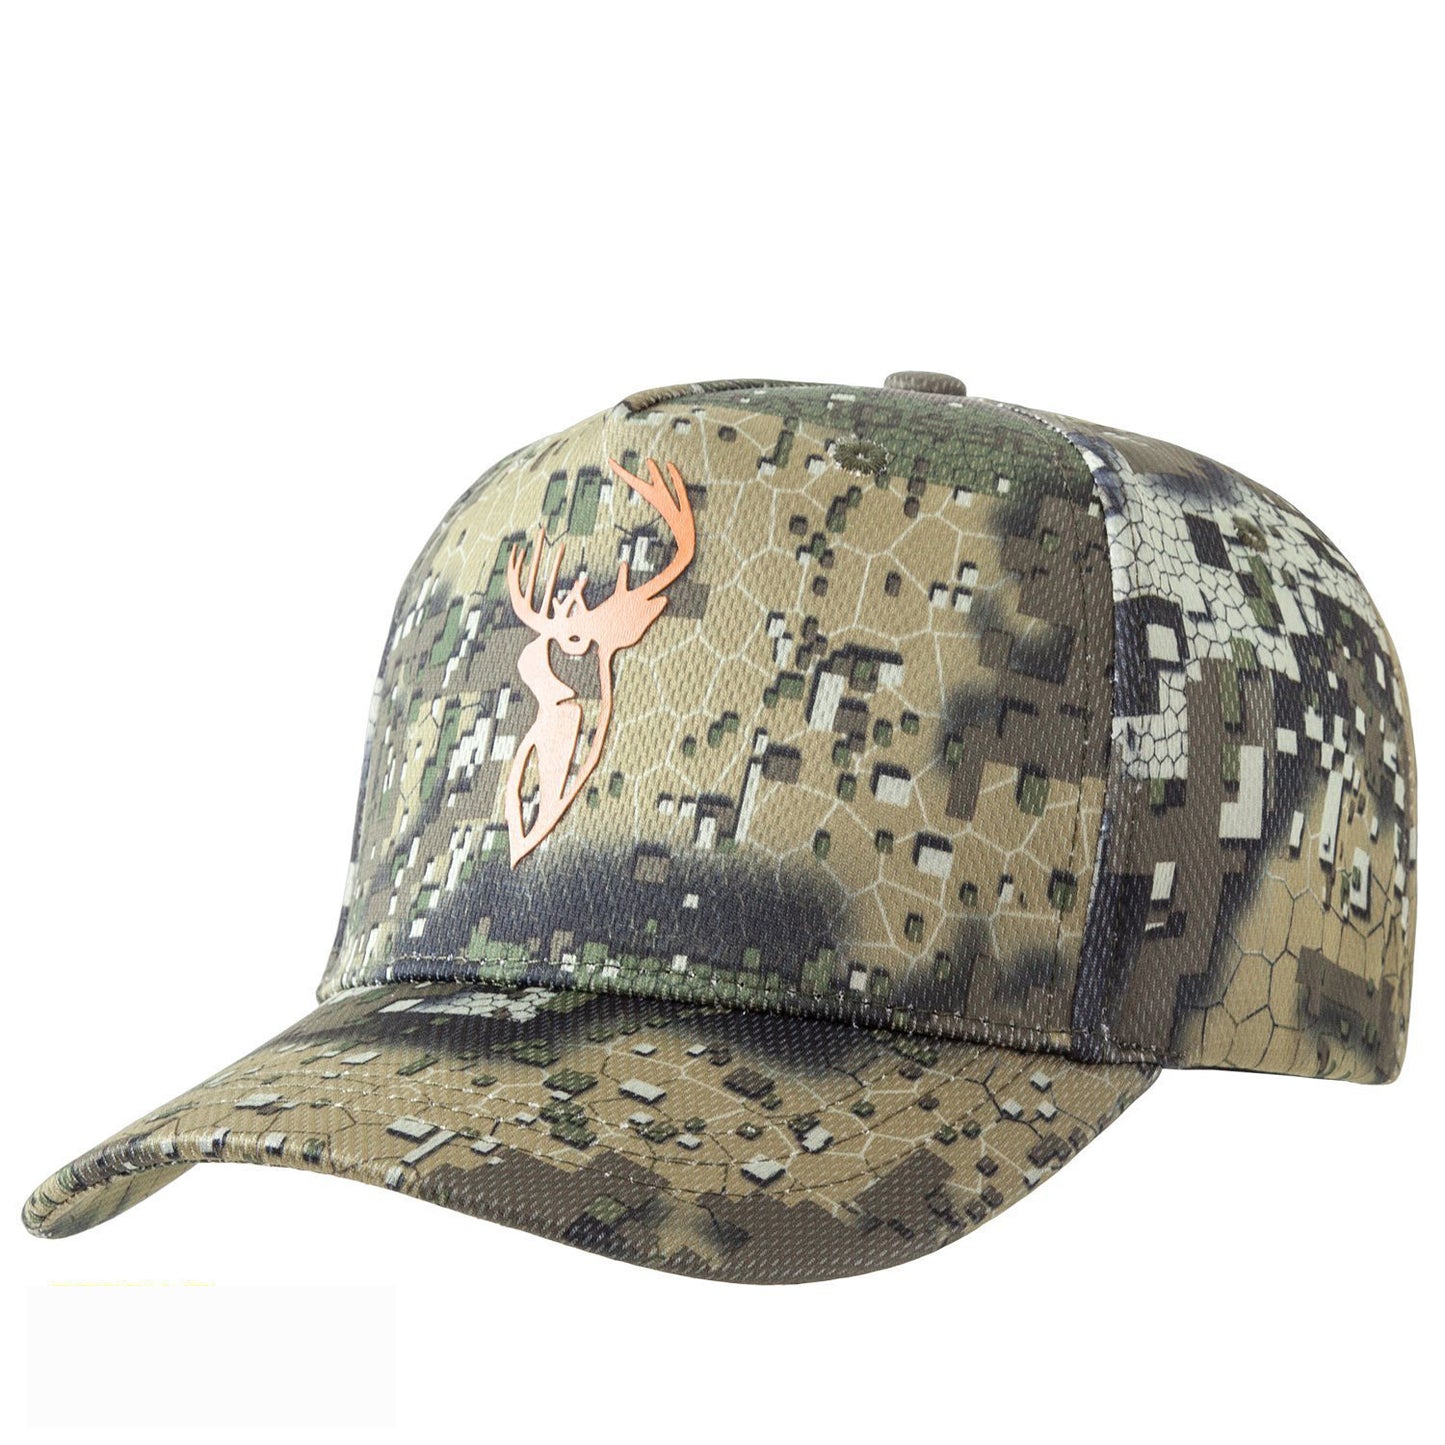 Hunters Element Hunters Element Desolve Veil Heat Beater Hunting Cap With Orange Stag Rosy Brown